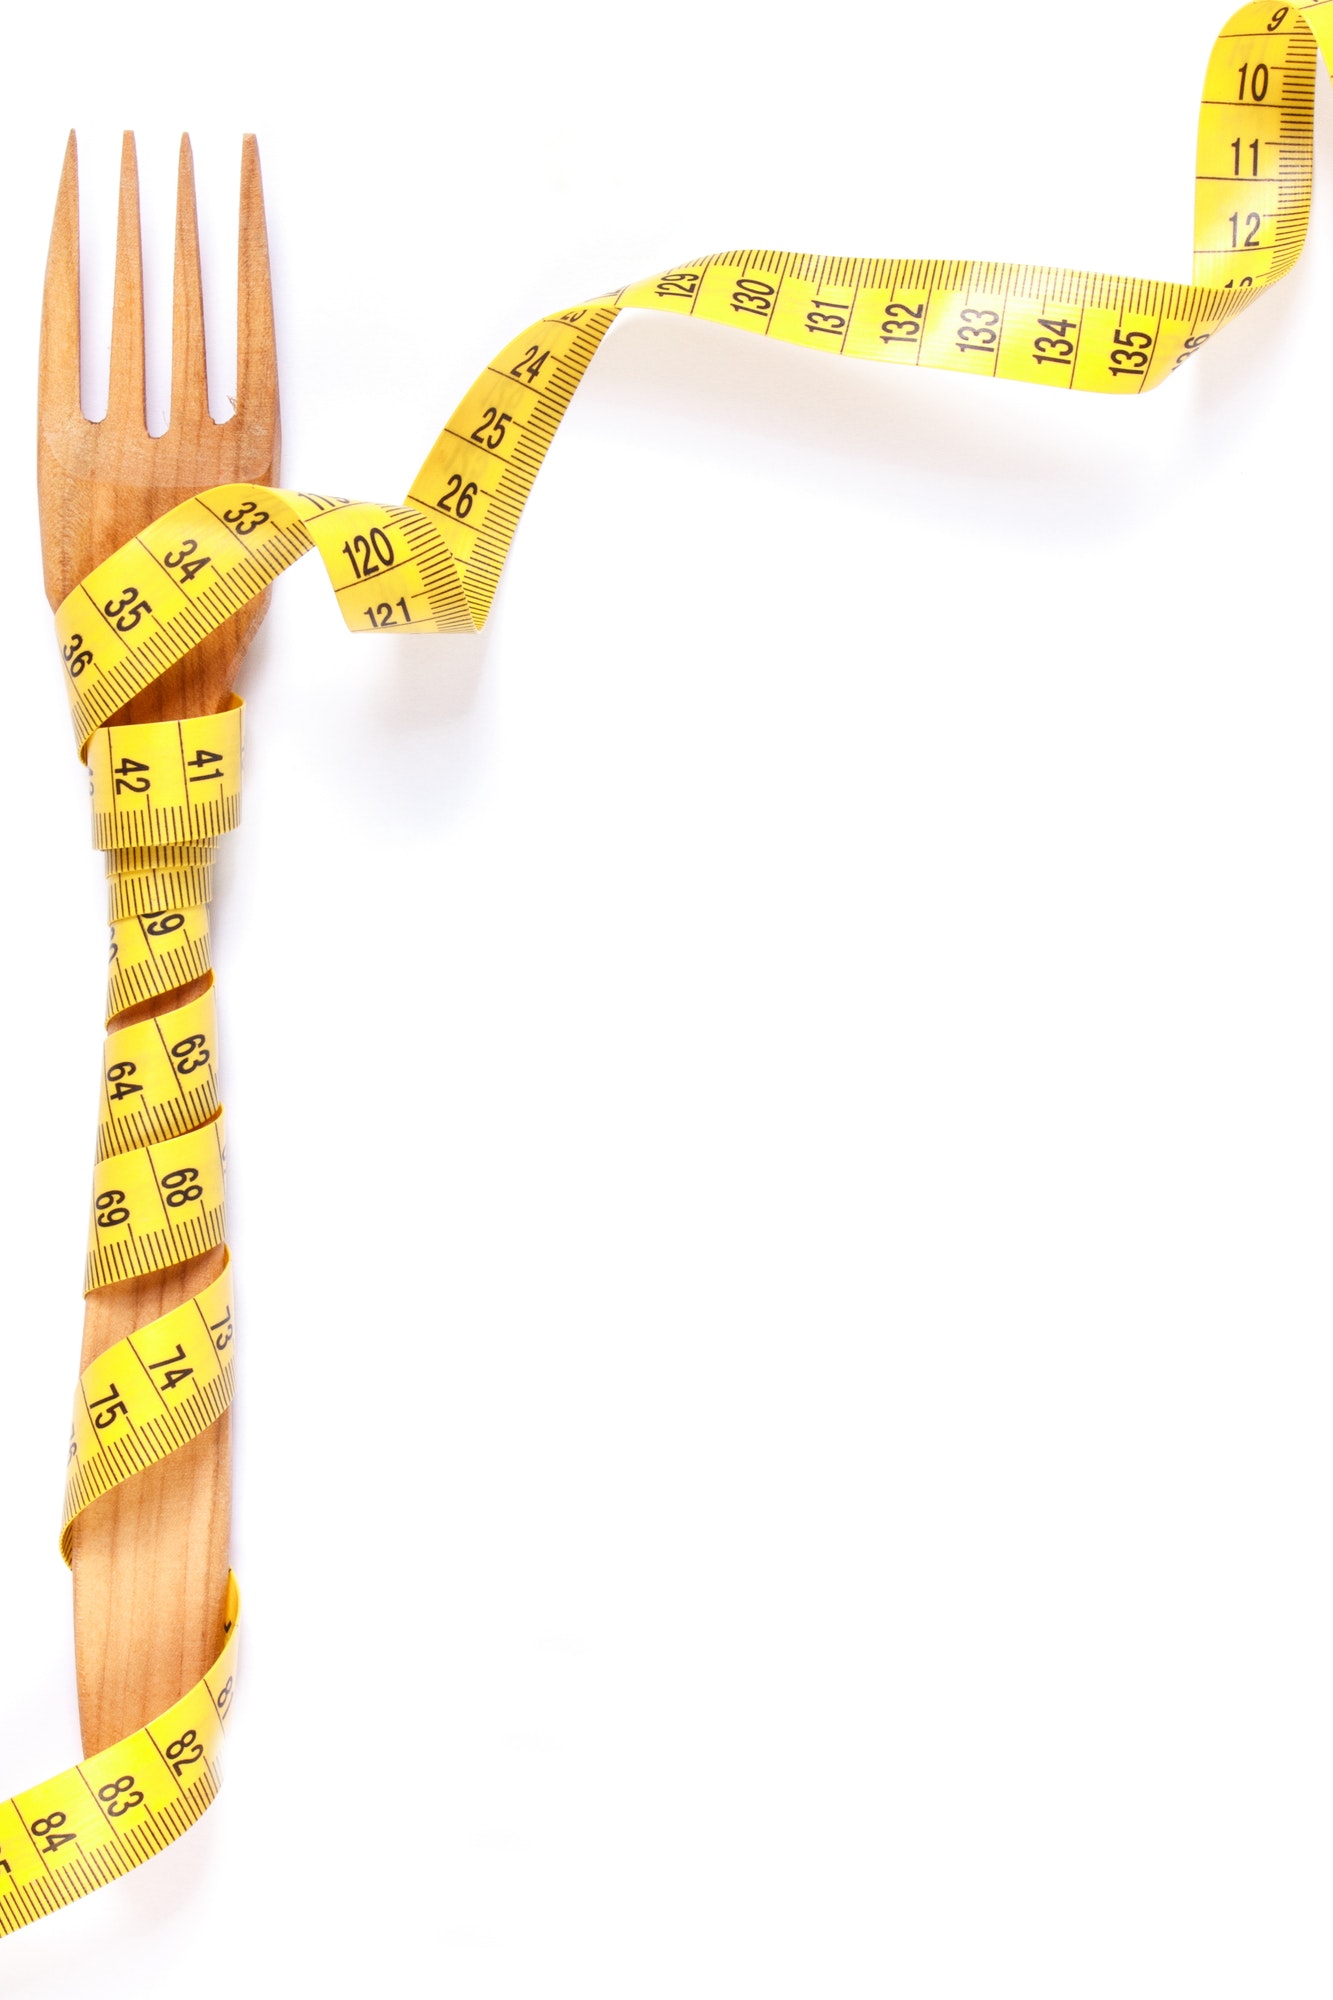 Wooden fork wrapped in centimeter, concept of lose weight and healthy lifestyle